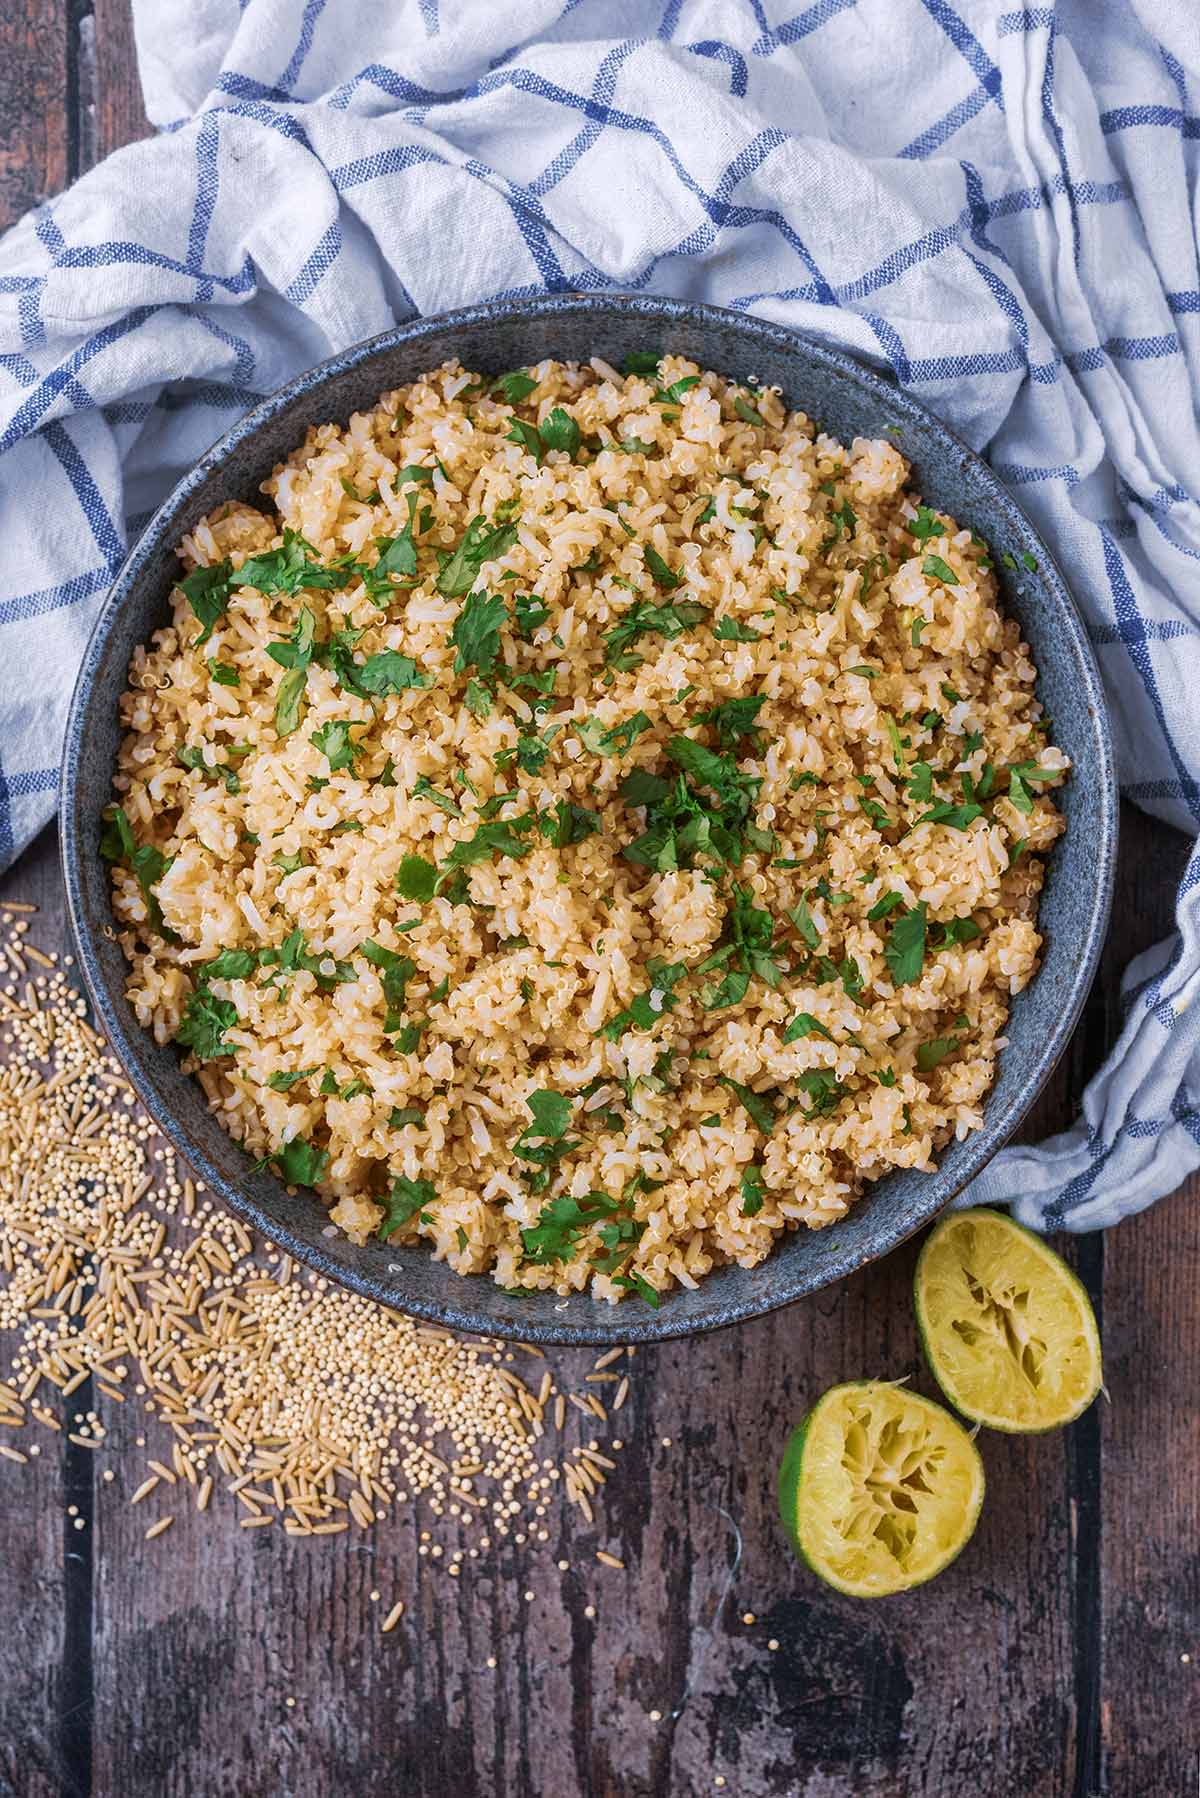 A large bowl of cooked rice and quinoa with chopped herbs scattered on top.